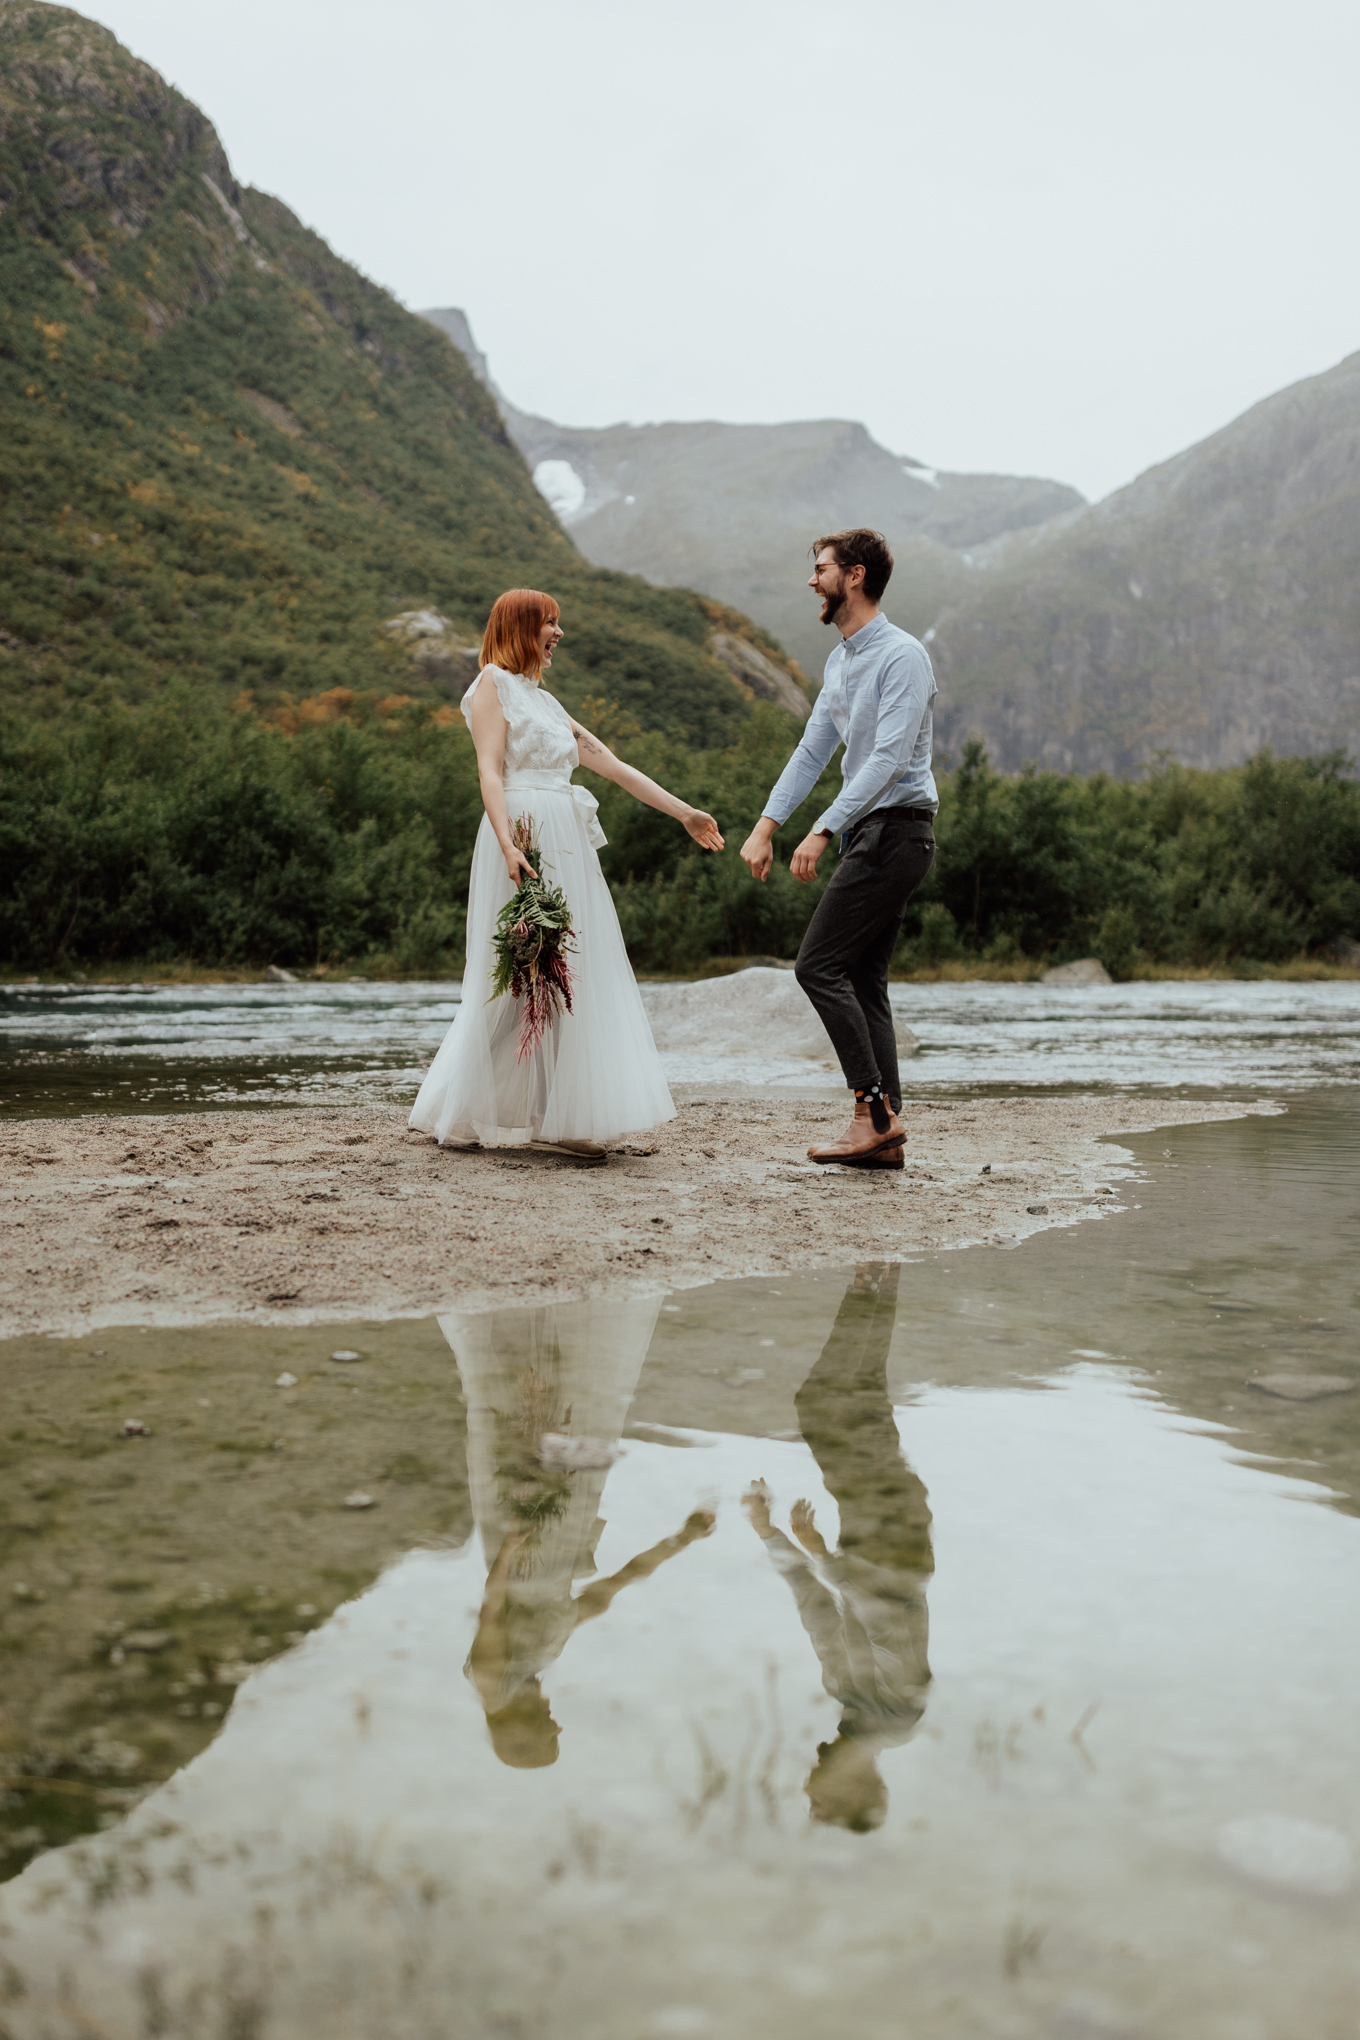 A couple dances and laughs during their Norway elopement at a glacial lake